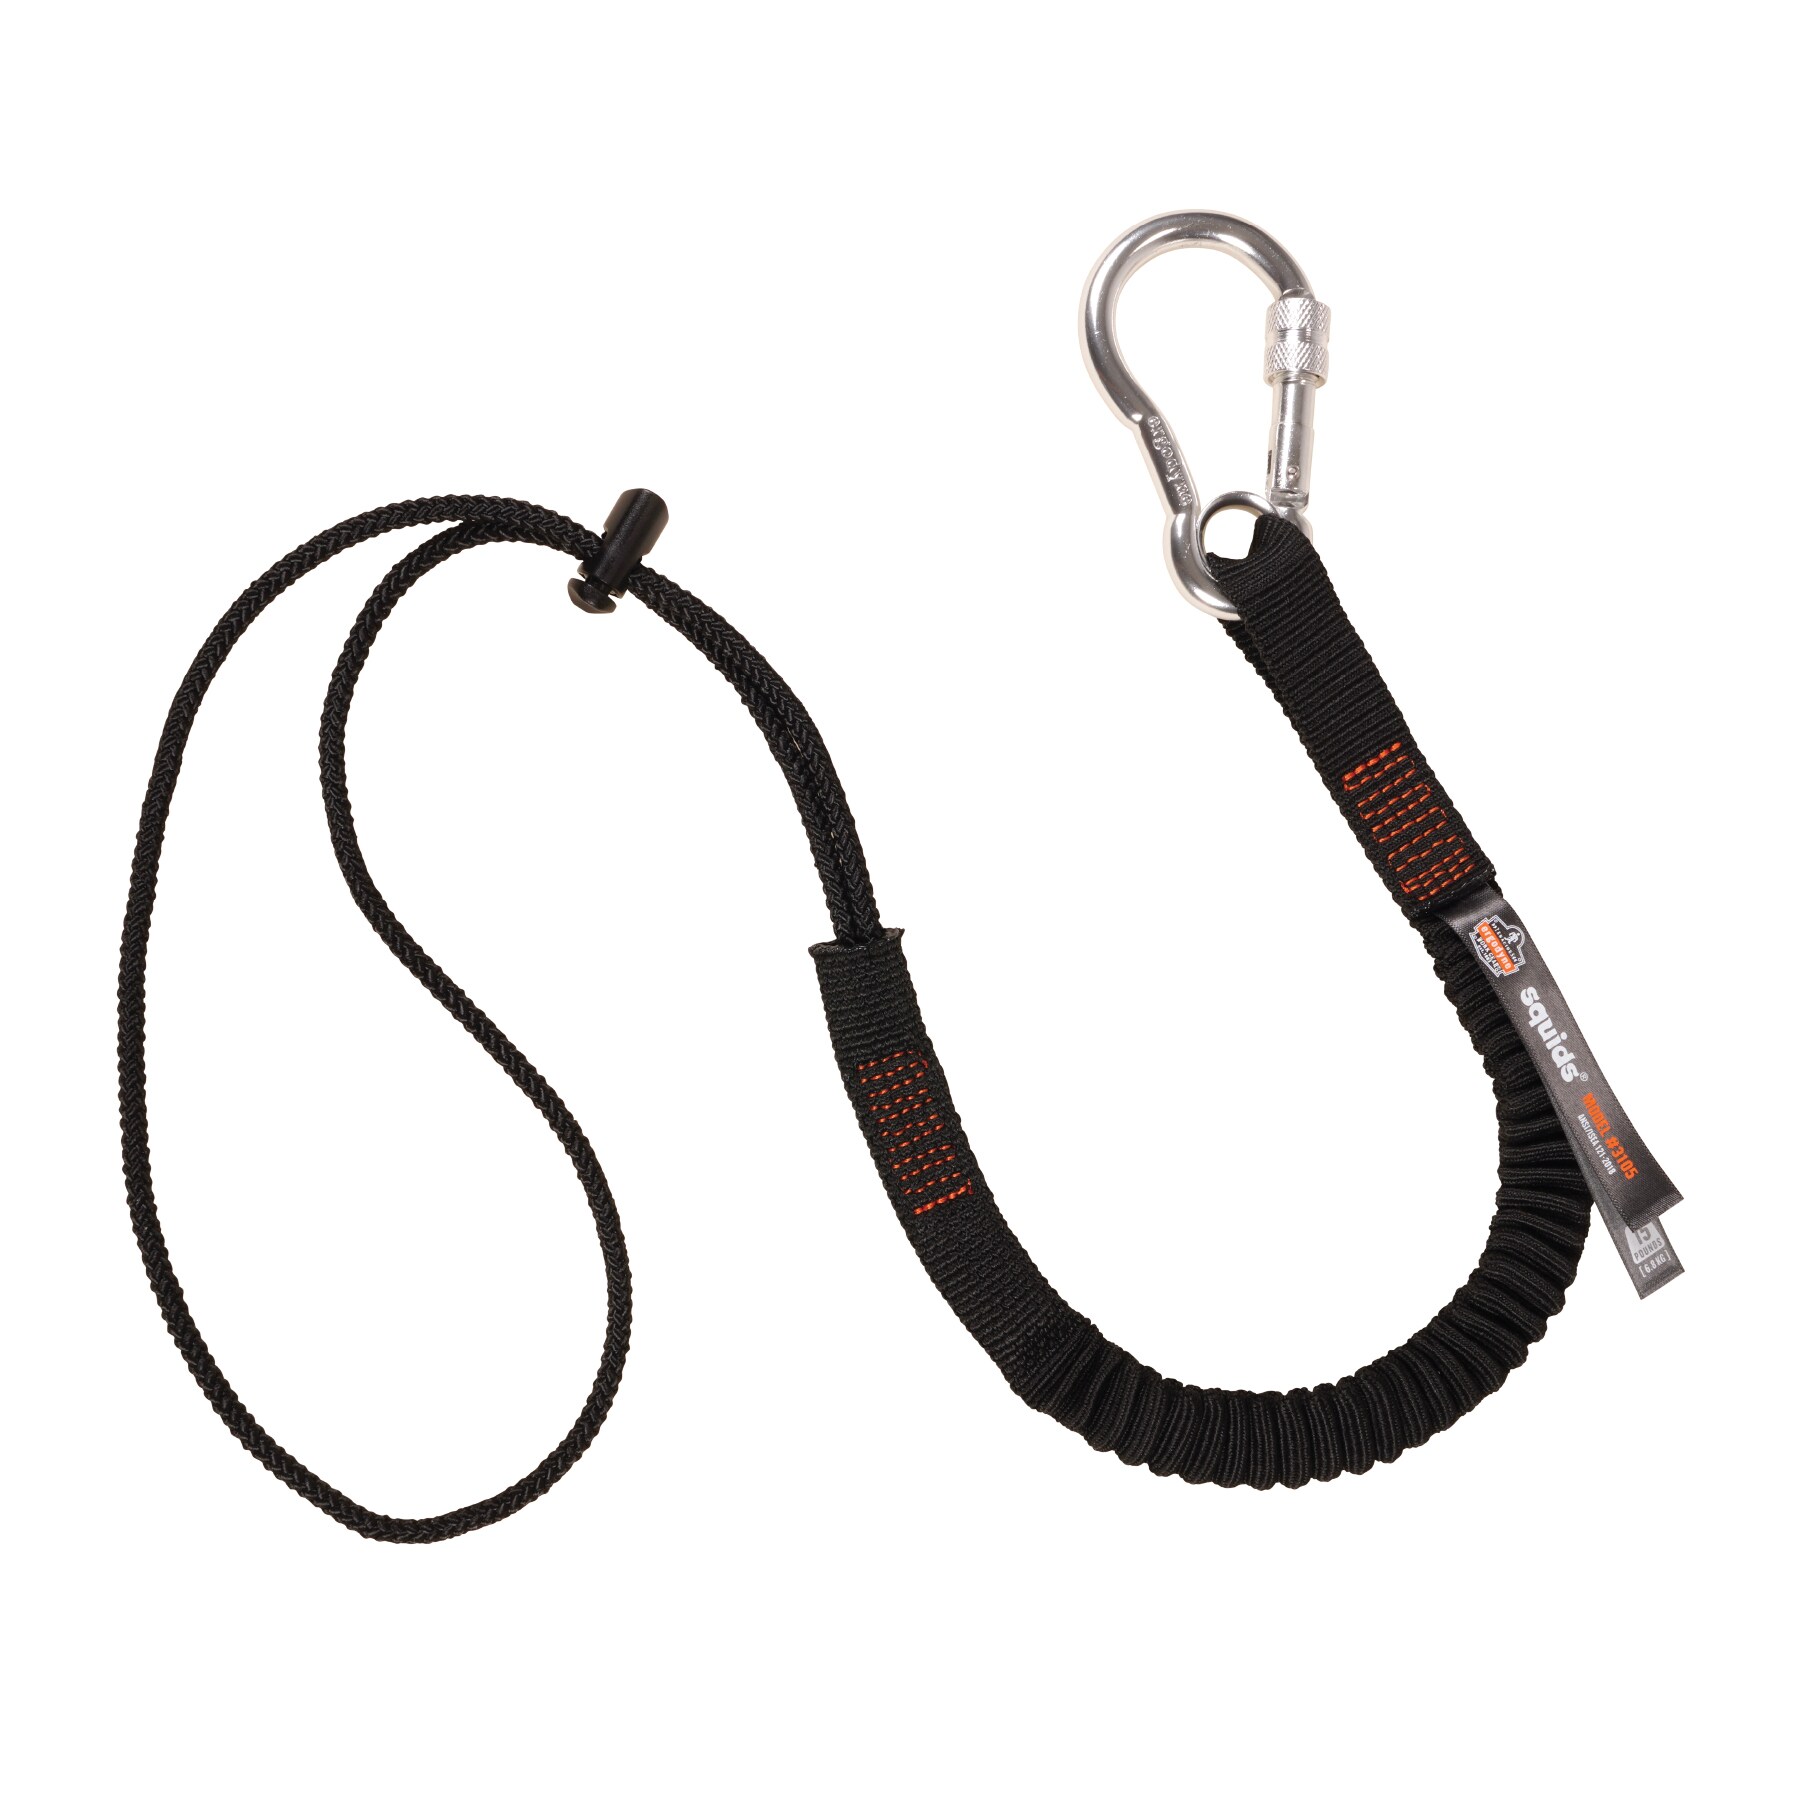 Single Carabiner Tool Rescue Rope Lanyard Safety Elastic Tool Lanyard With  Single Carabiner And Adjustable For